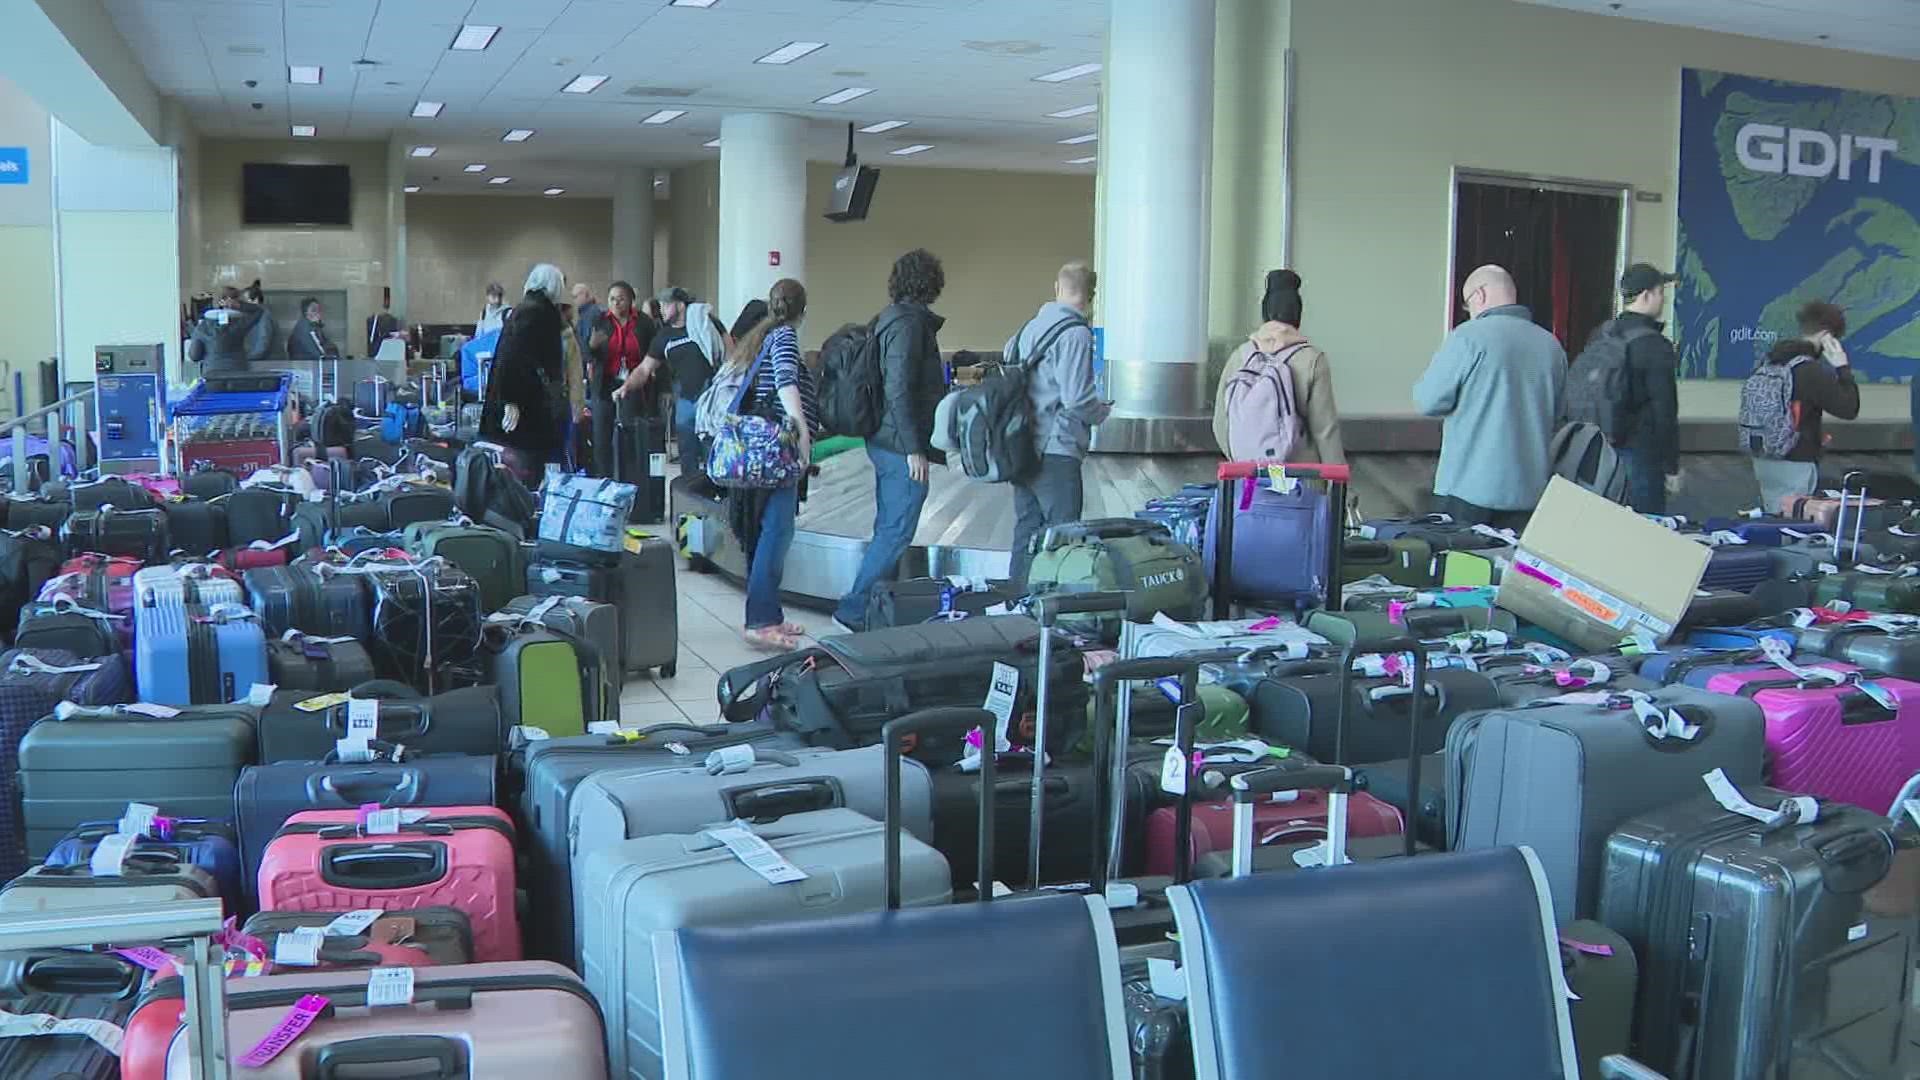 Our Laura Barczeski reports that the most important thing for airline passengers to know Tuesday is if your flight has been cancelled, then you entitled to a refund.